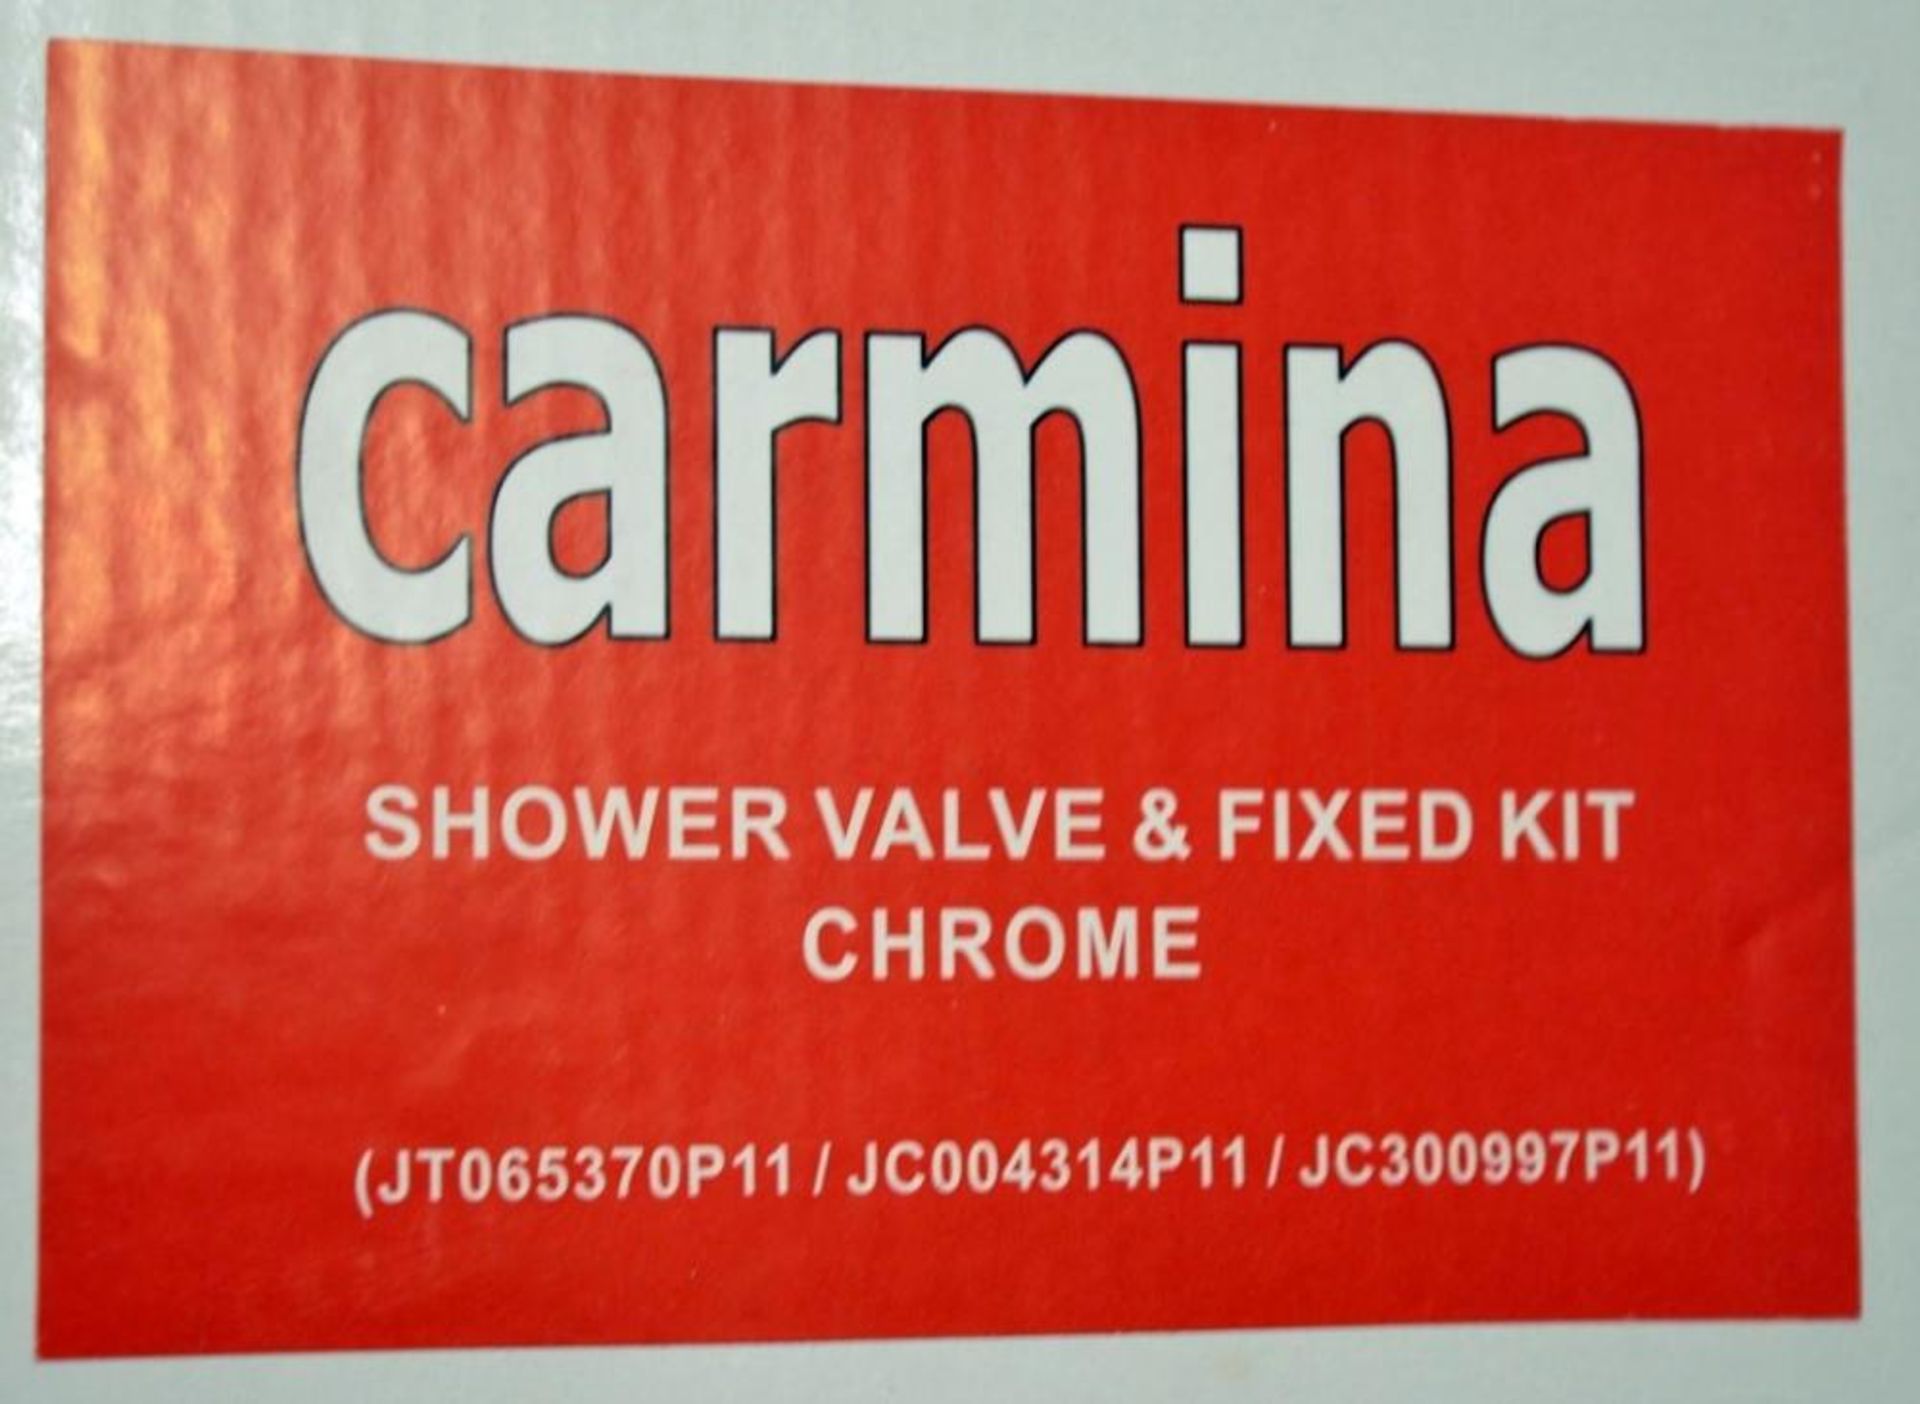 1 x Carmina Shower Valve Kit - Contains Chrome Shower Head, Fixed Arm and Manual Control - Brass Con - Image 7 of 13